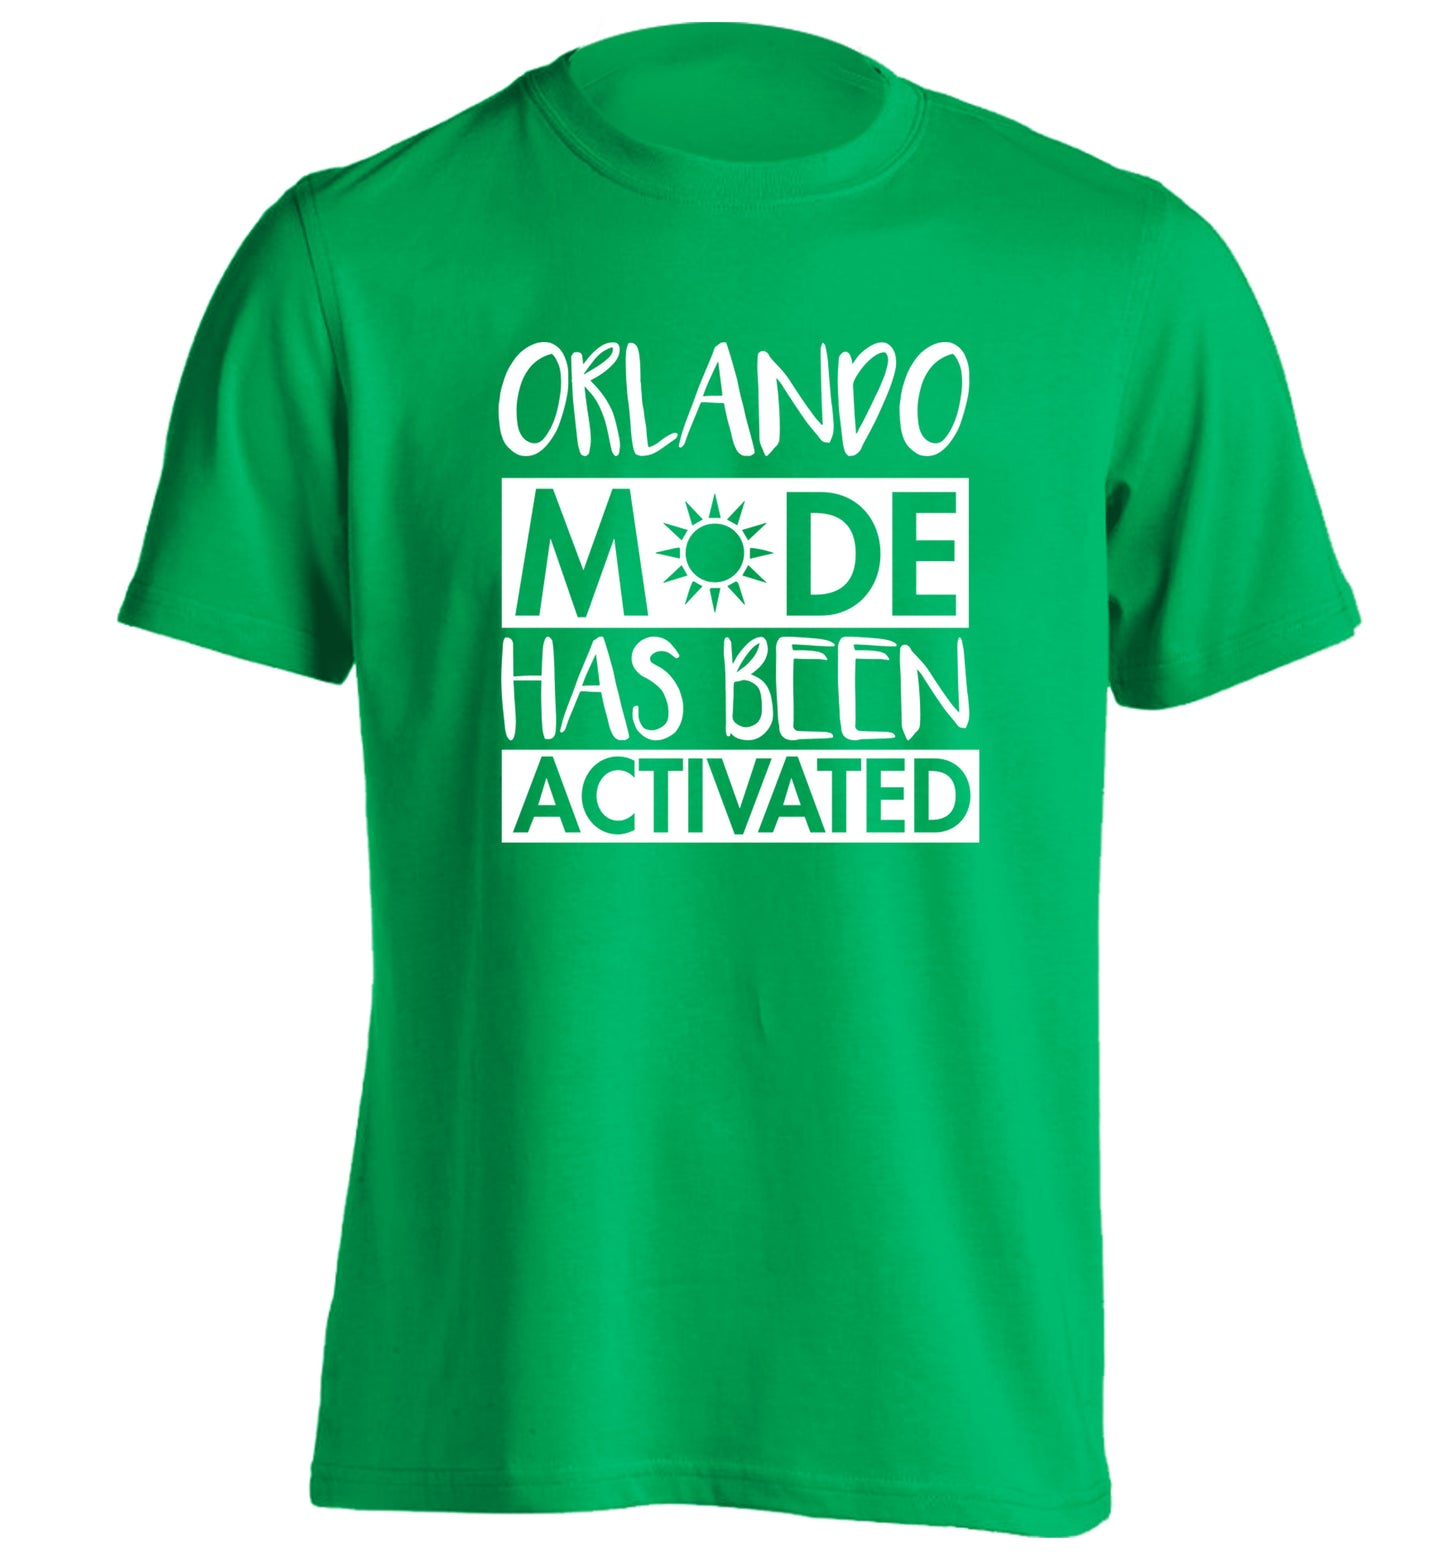 Orlando mode has been activated adults unisex green Tshirt 2XL